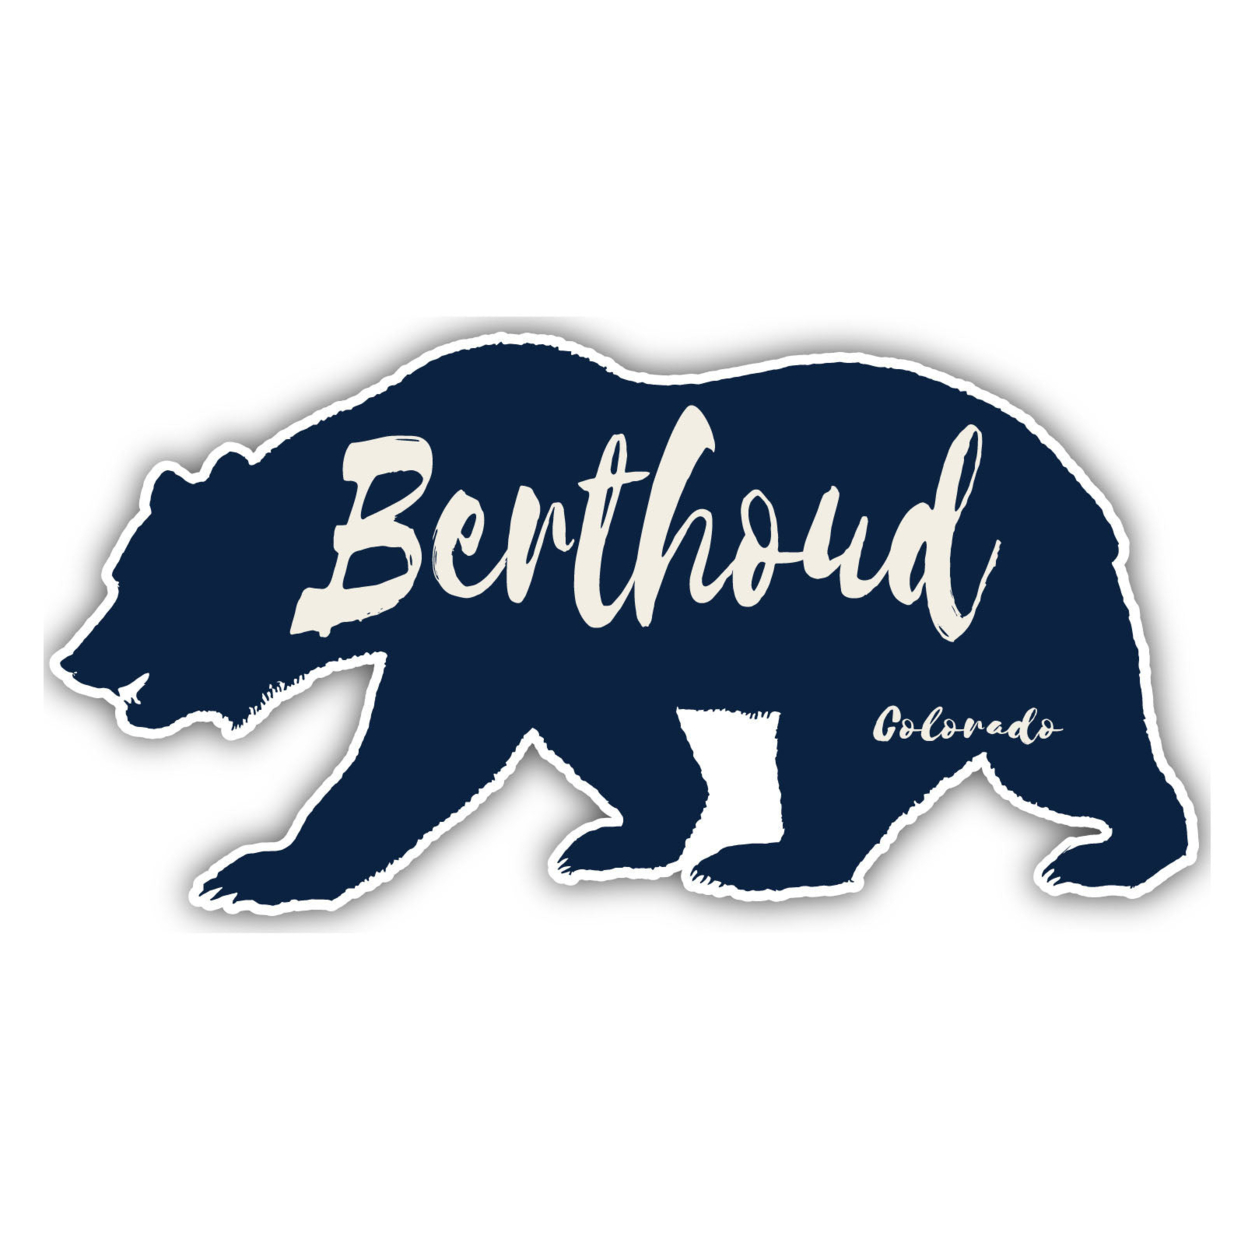 Berthoud Colorado Souvenir Decorative Stickers (Choose Theme And Size) - 4-Pack, 10-Inch, Adventures Awaits